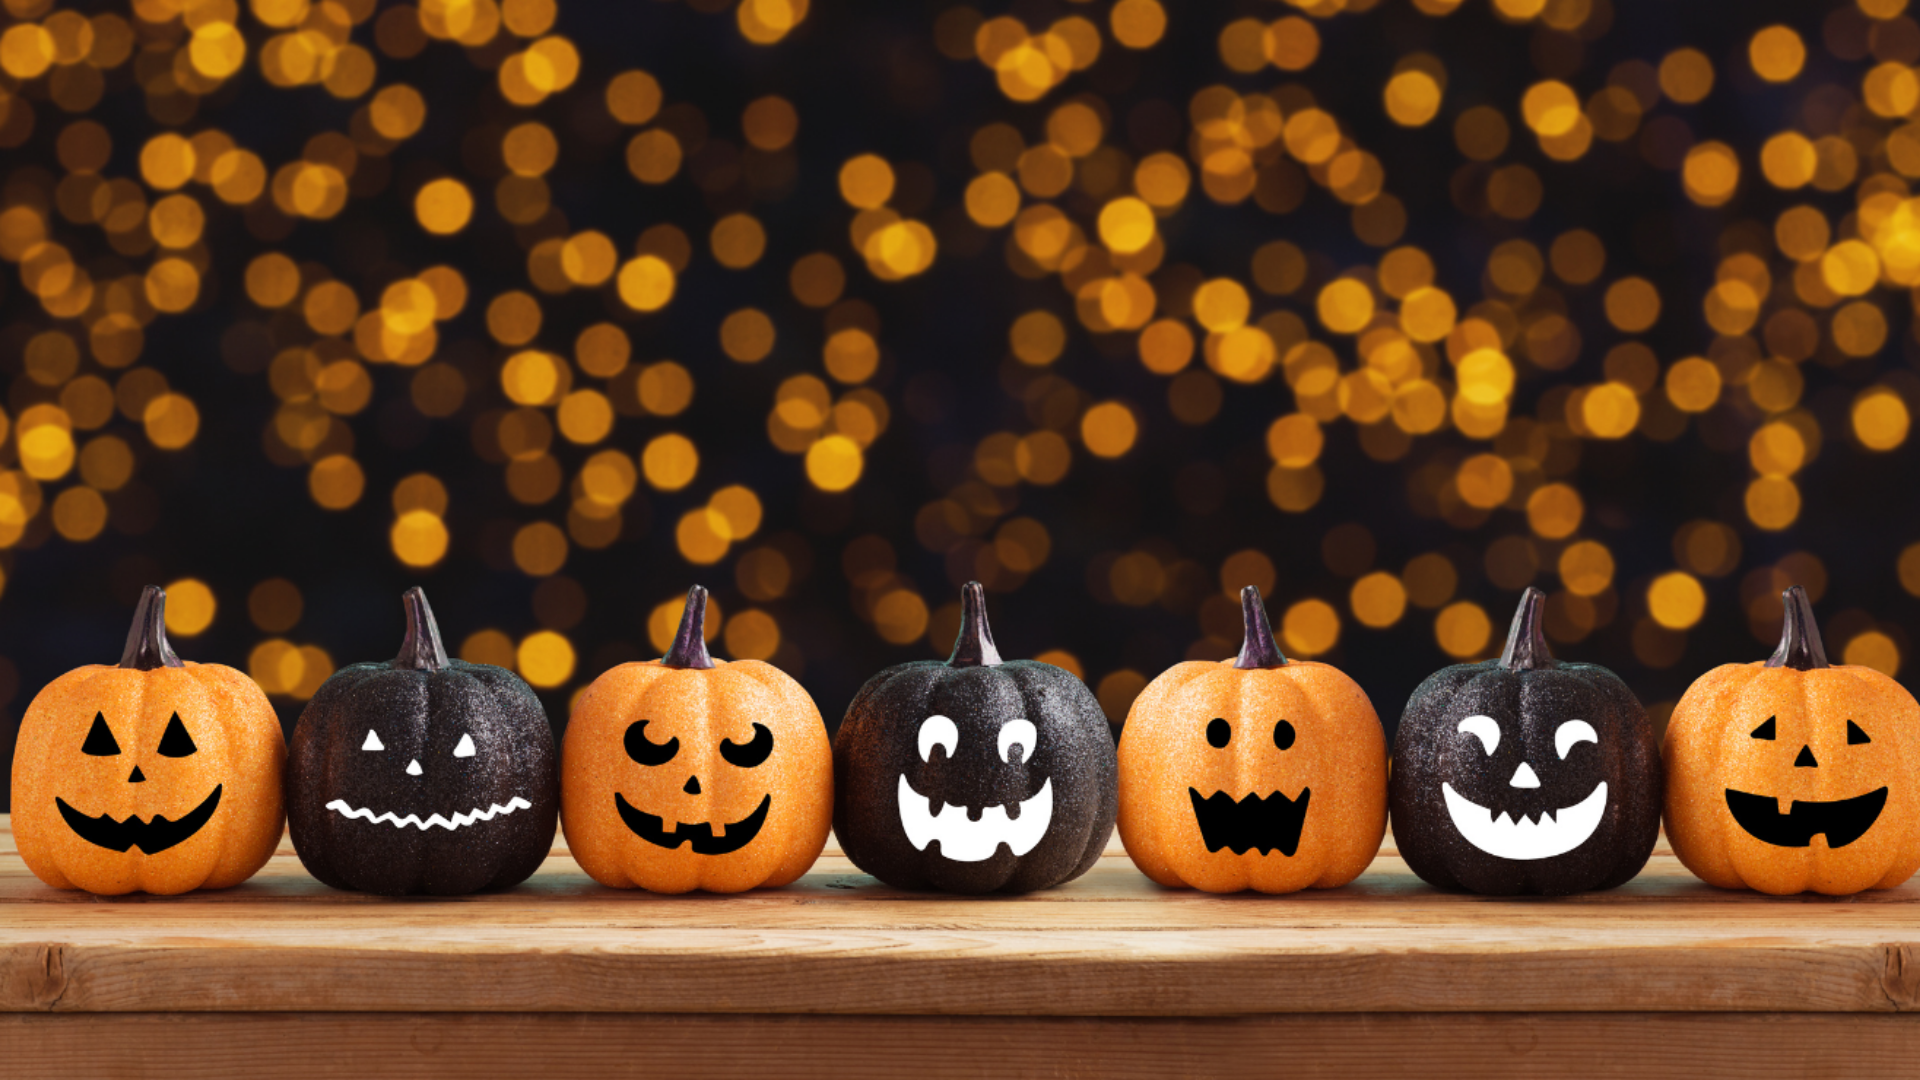 Get your orders in by 19/10 to secure your Halloween treats, while stocks last!